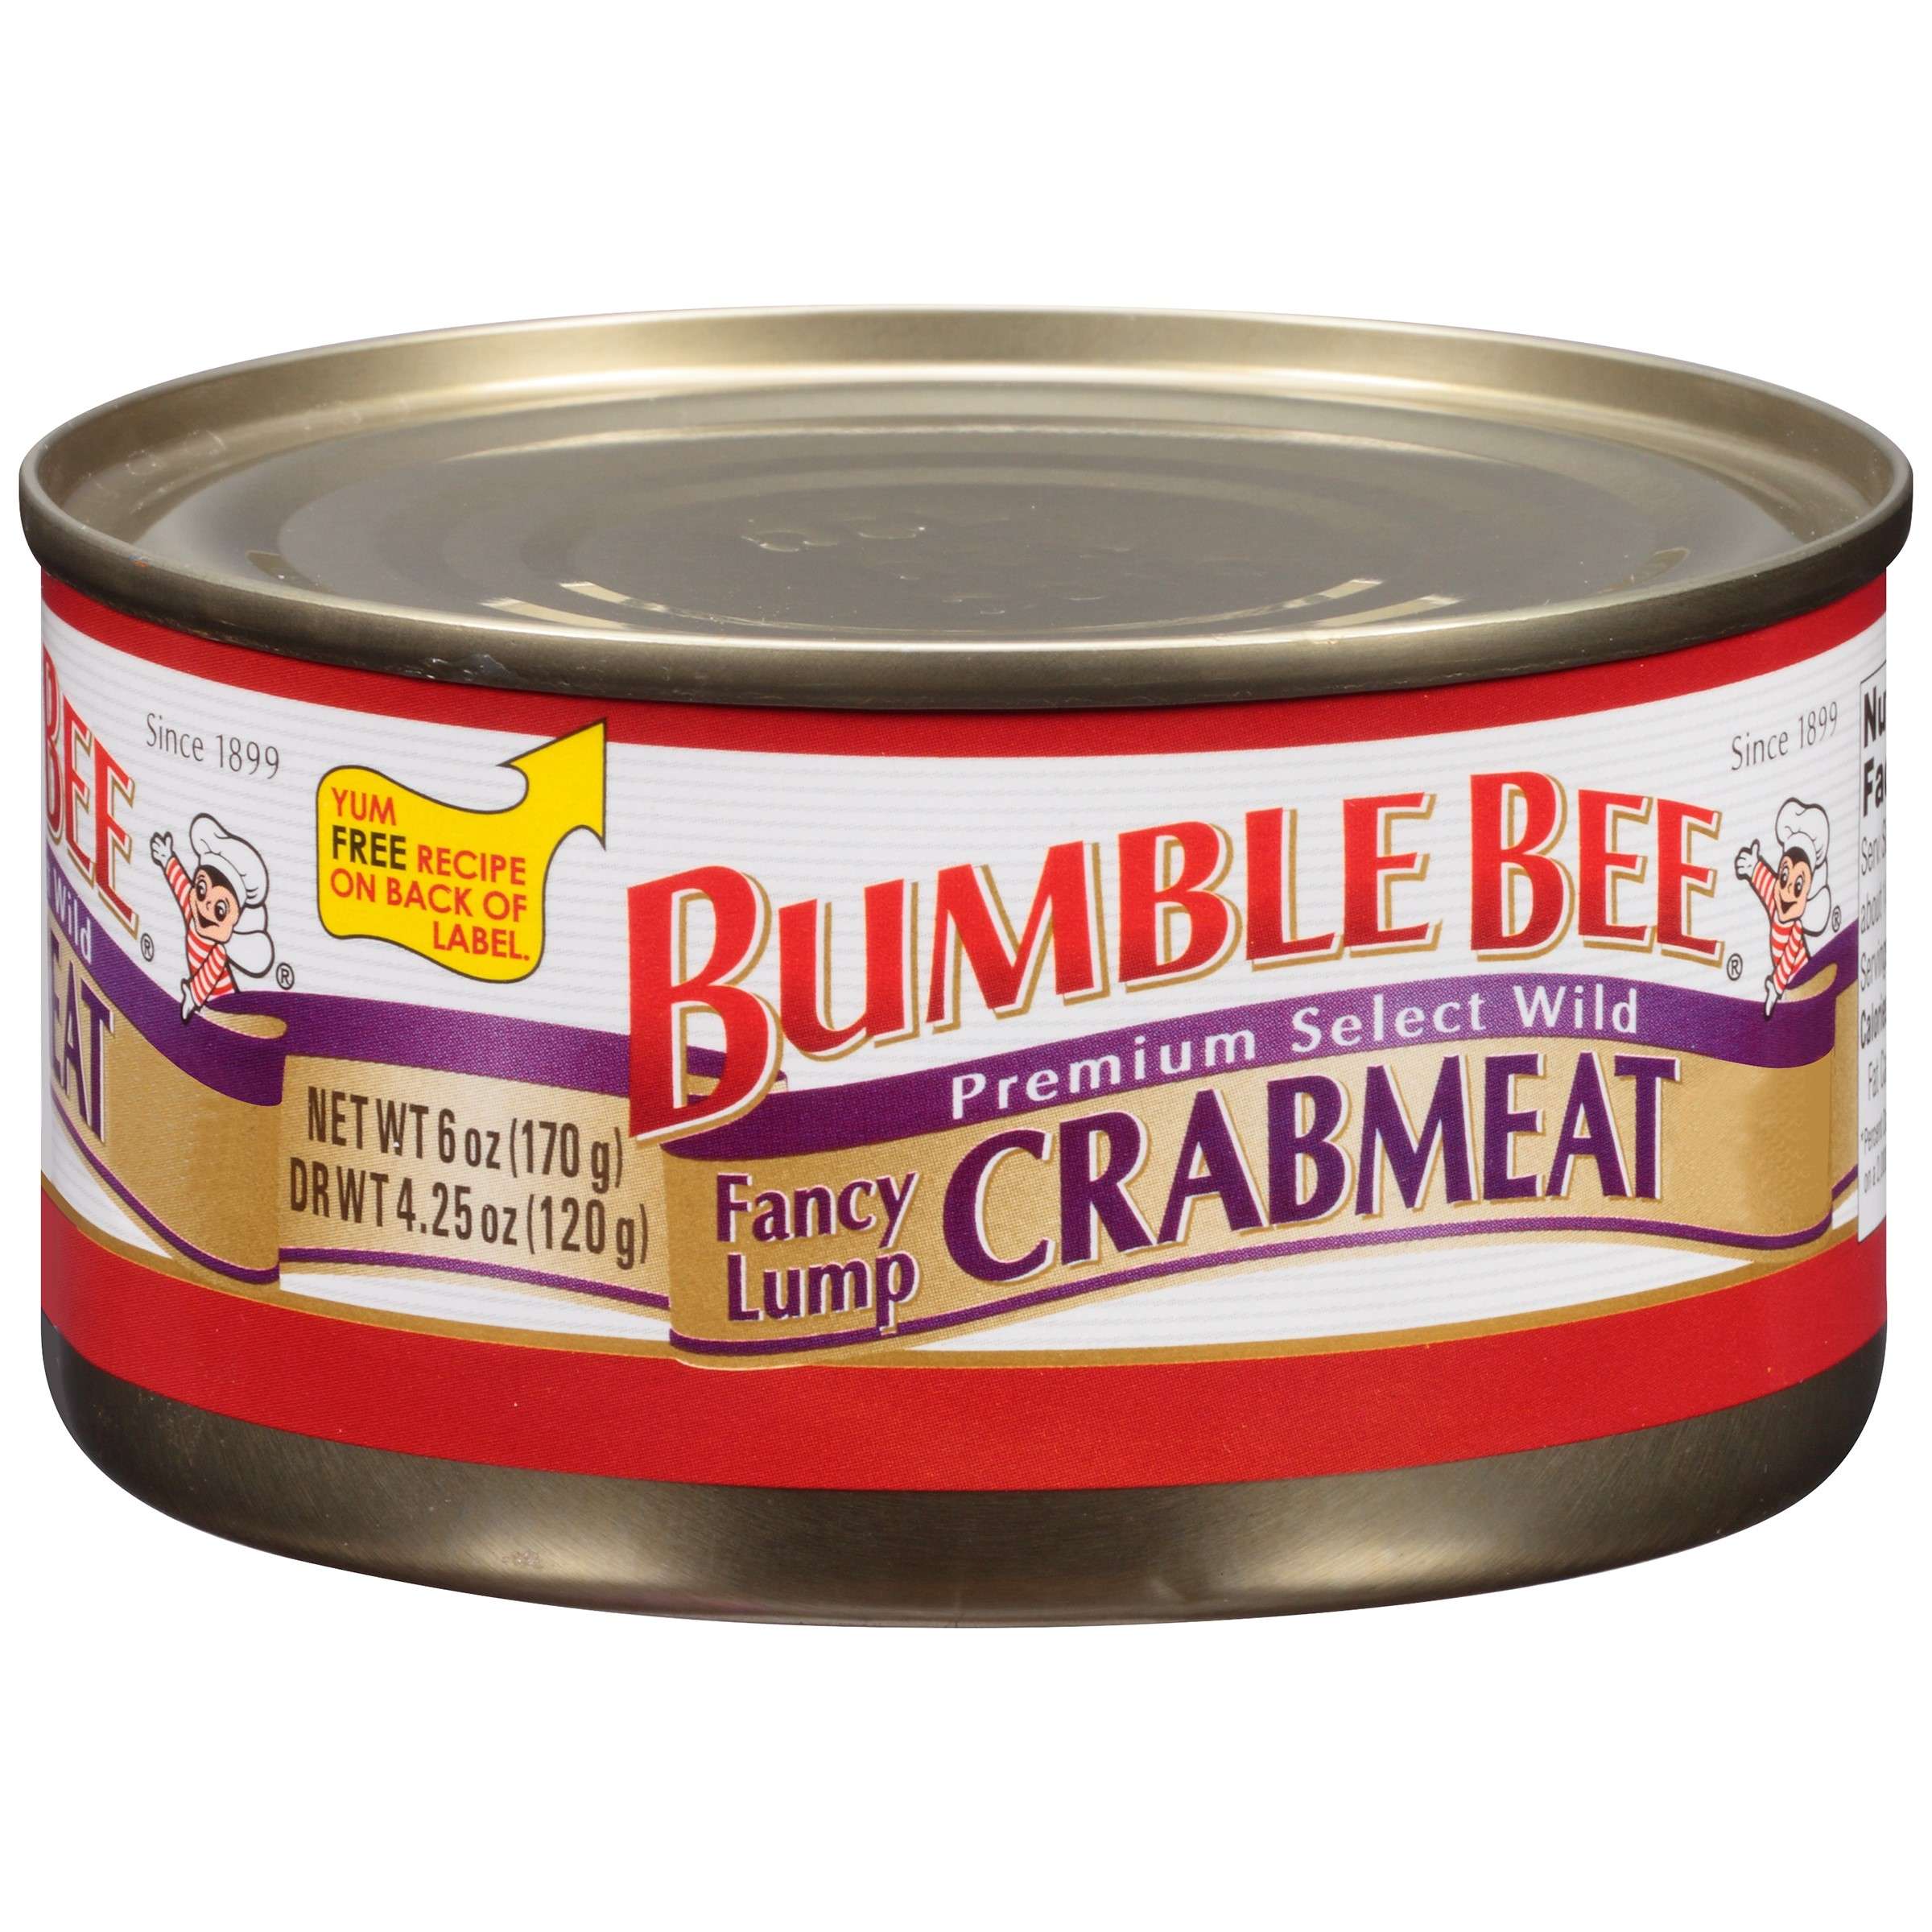 Bumble Bee Fancy Lump Crabmeat, 6oz can